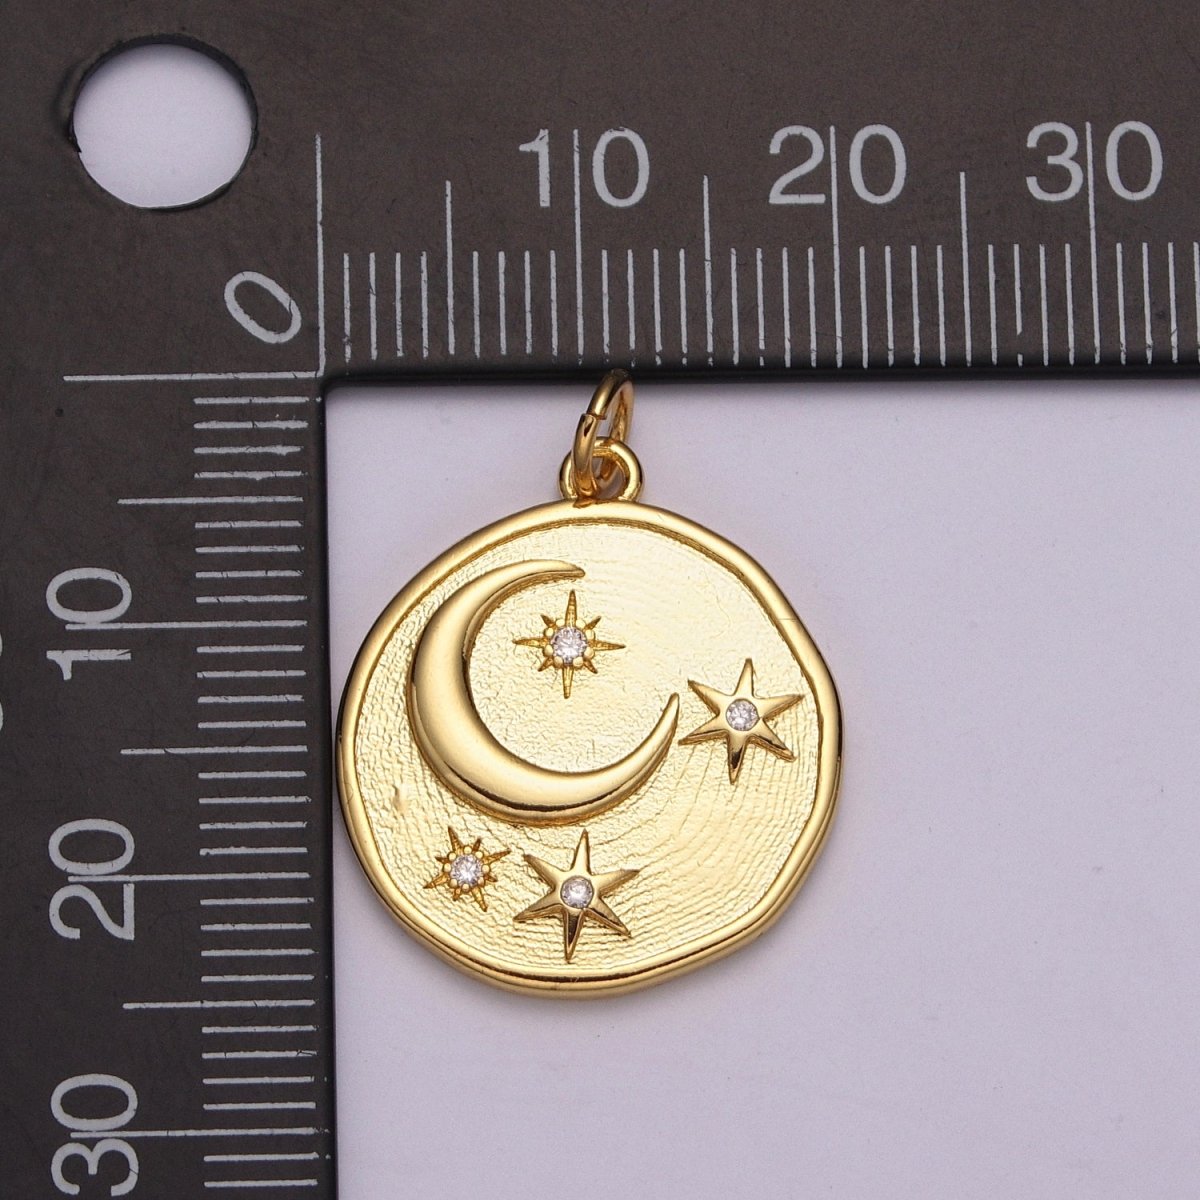 24K Gold Filled Celestial Charm Round Disc Coin Charm Crescent Moon Star Charm for Minimalist Jewelry Design M-890 M-891 - DLUXCA